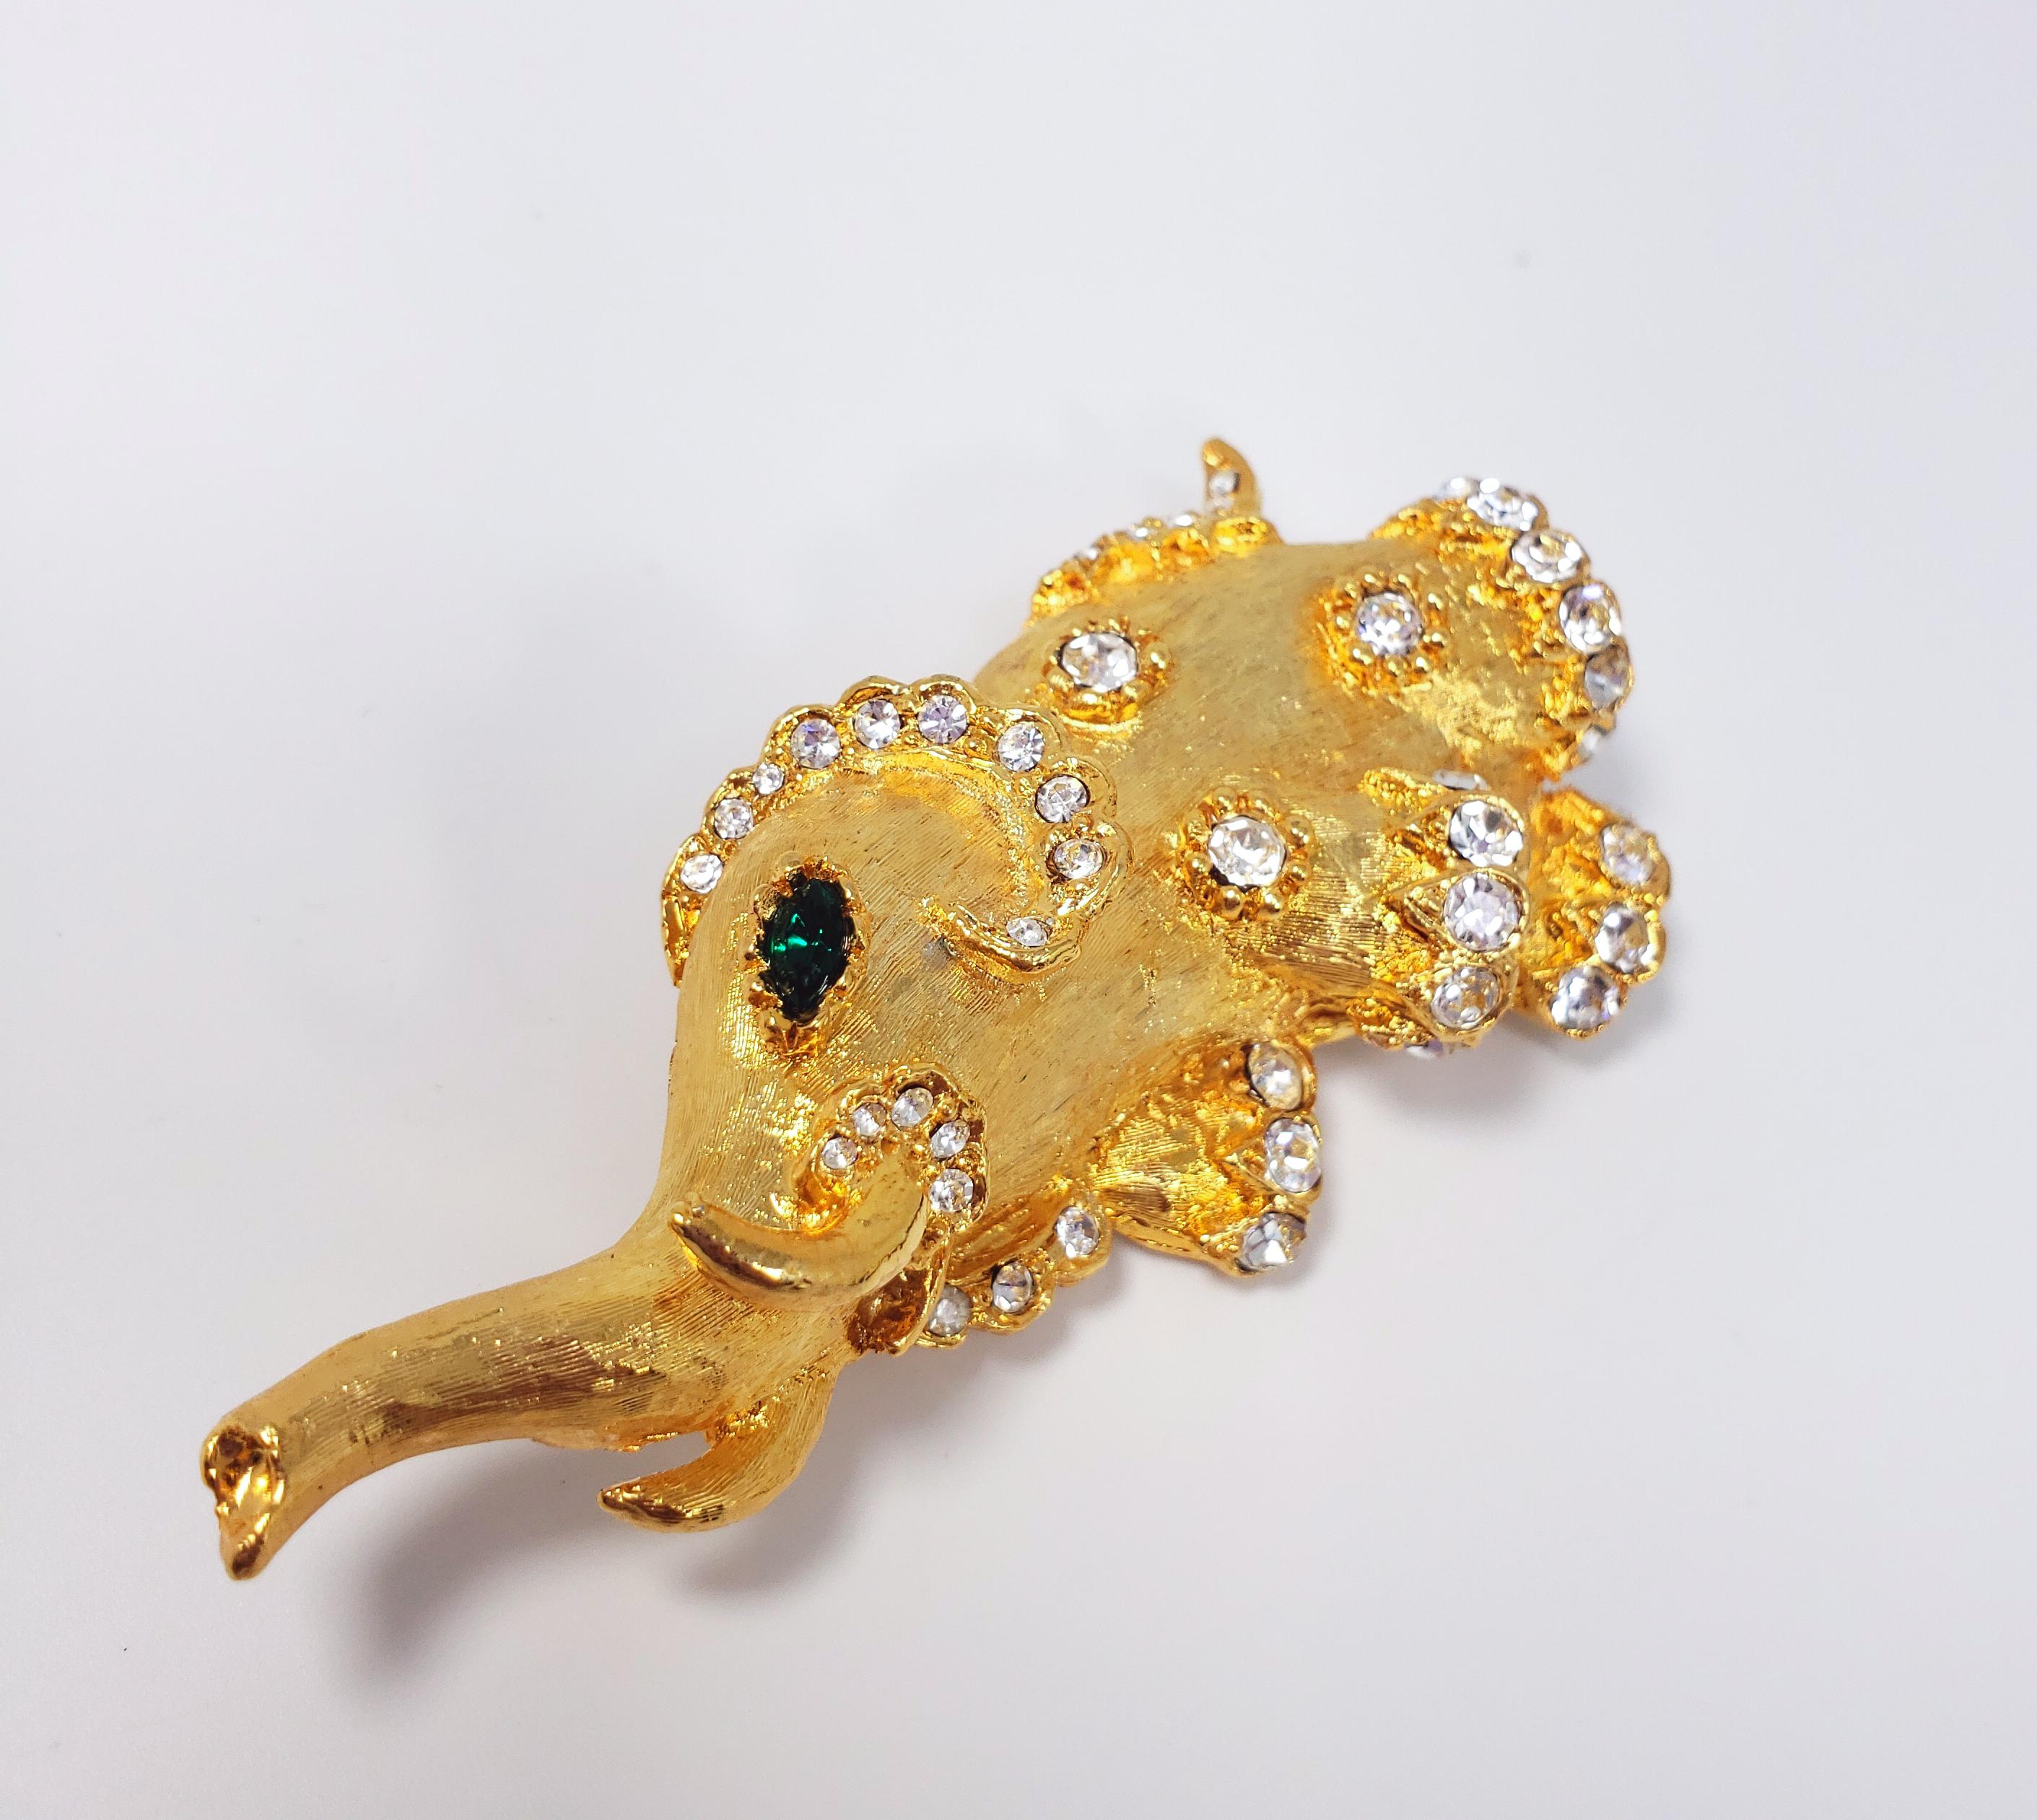 A quirky pin by Kenneth Jay Lane featuring a textured yellow gold-plated elephant with two emerald crystal eyes and clear crystal accents throughout, all set in decorative bezels. Safety-pin closure.

Hallmarks: Kenneth © Lane, Made in USA